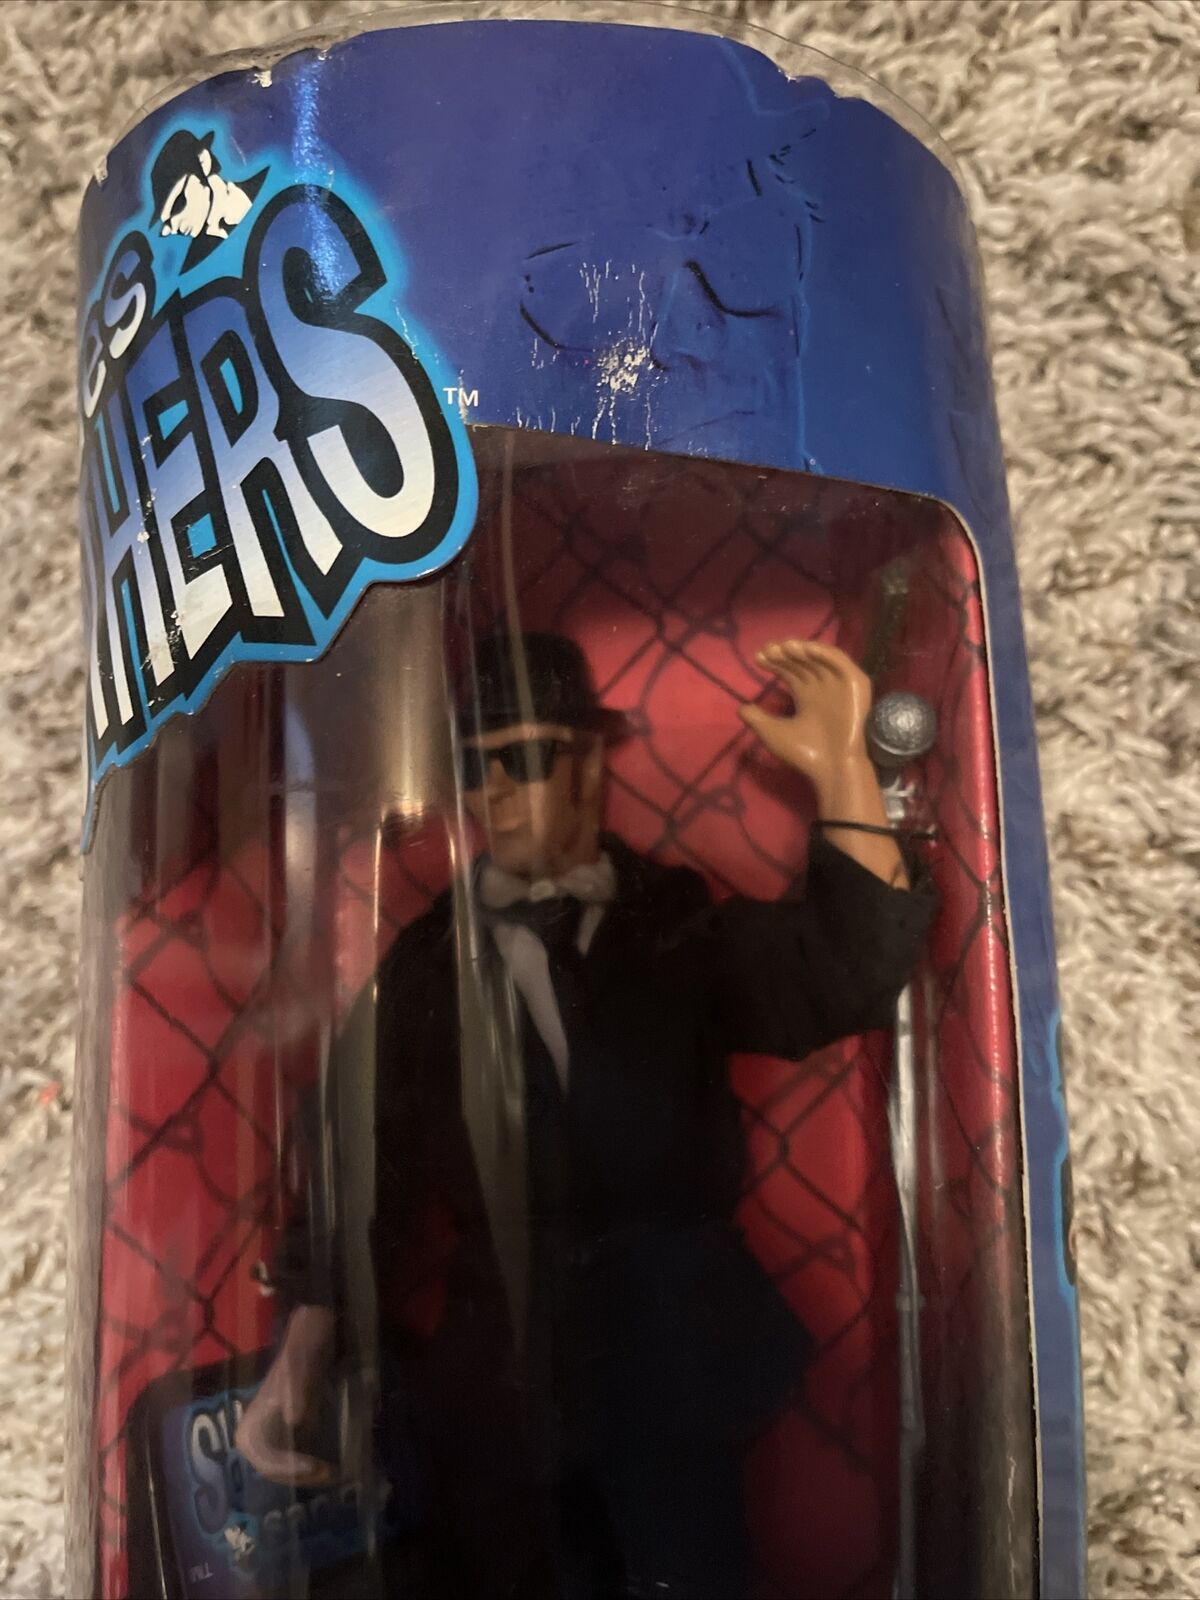 Elwood Blues action figure 1997 NIB Limited Edition from The Blues Brothers